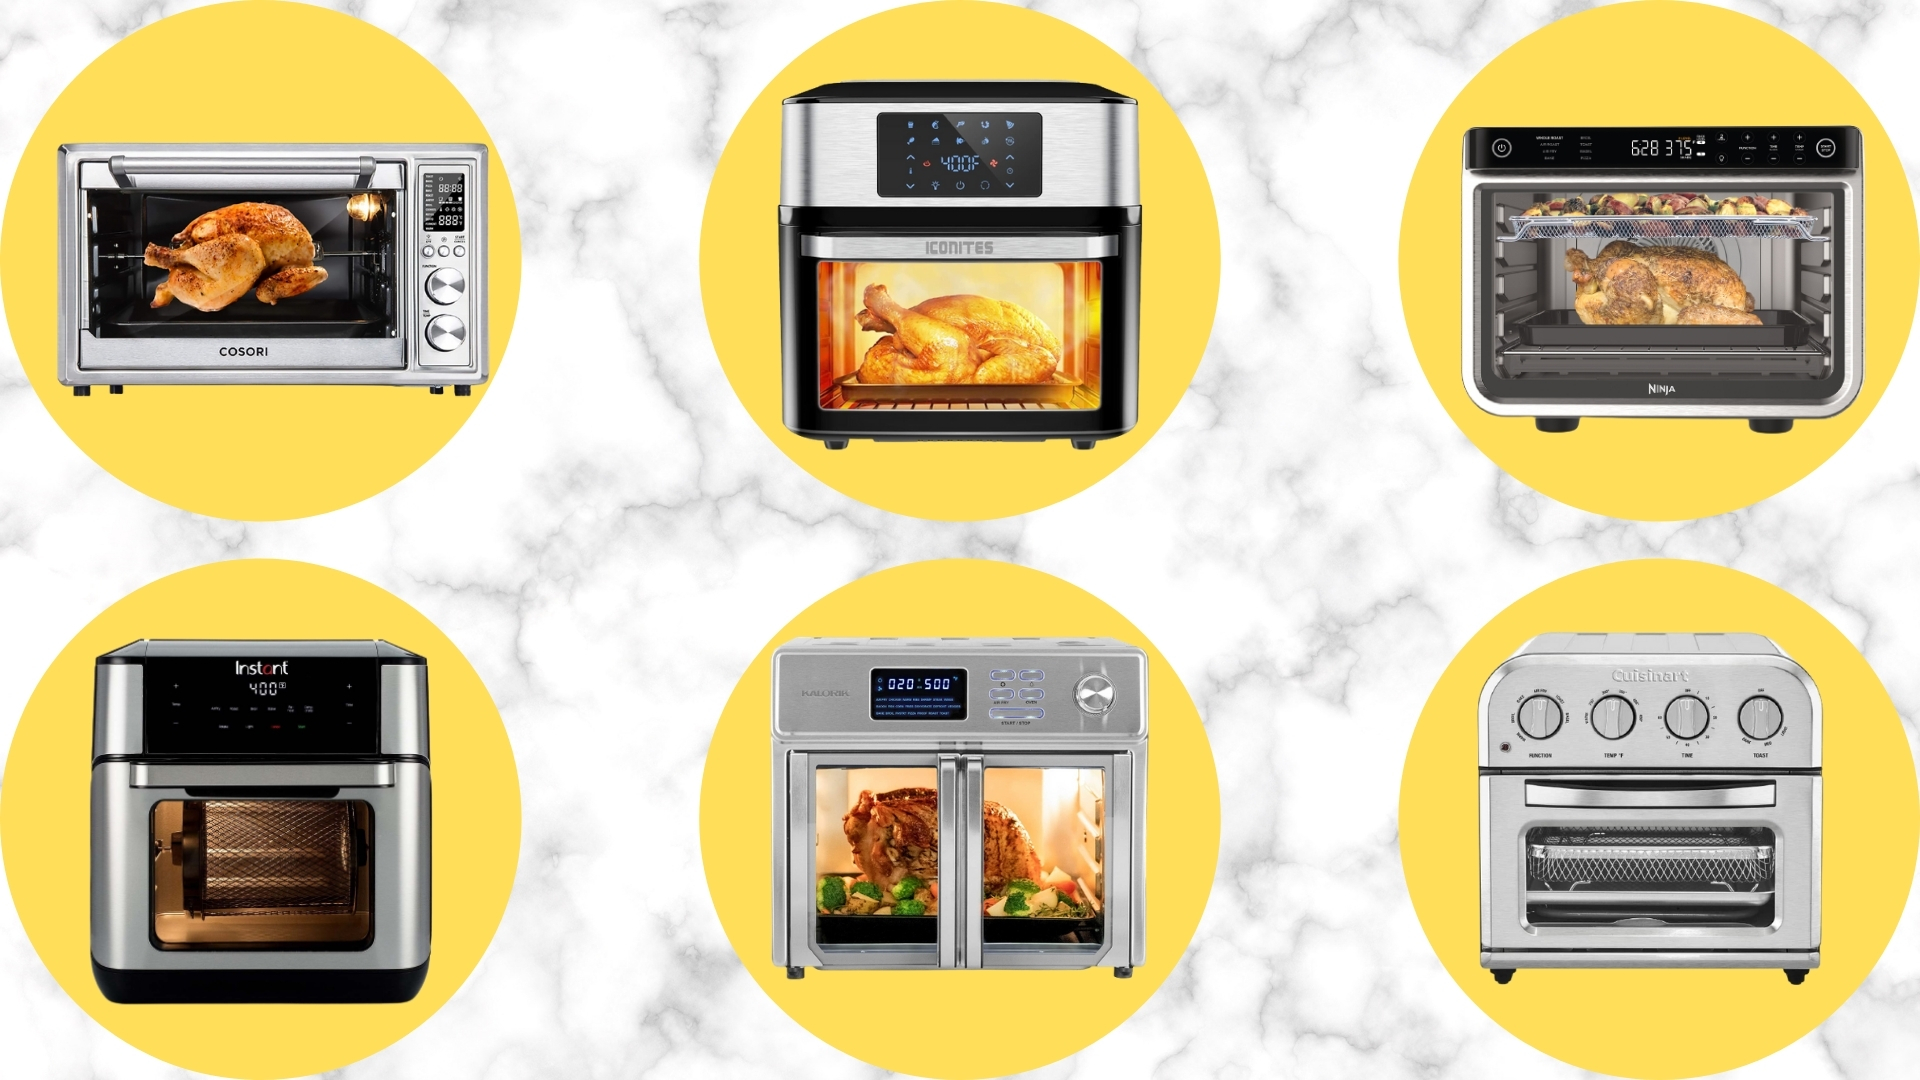 First price drop hits COSORI's smart family air fry oven